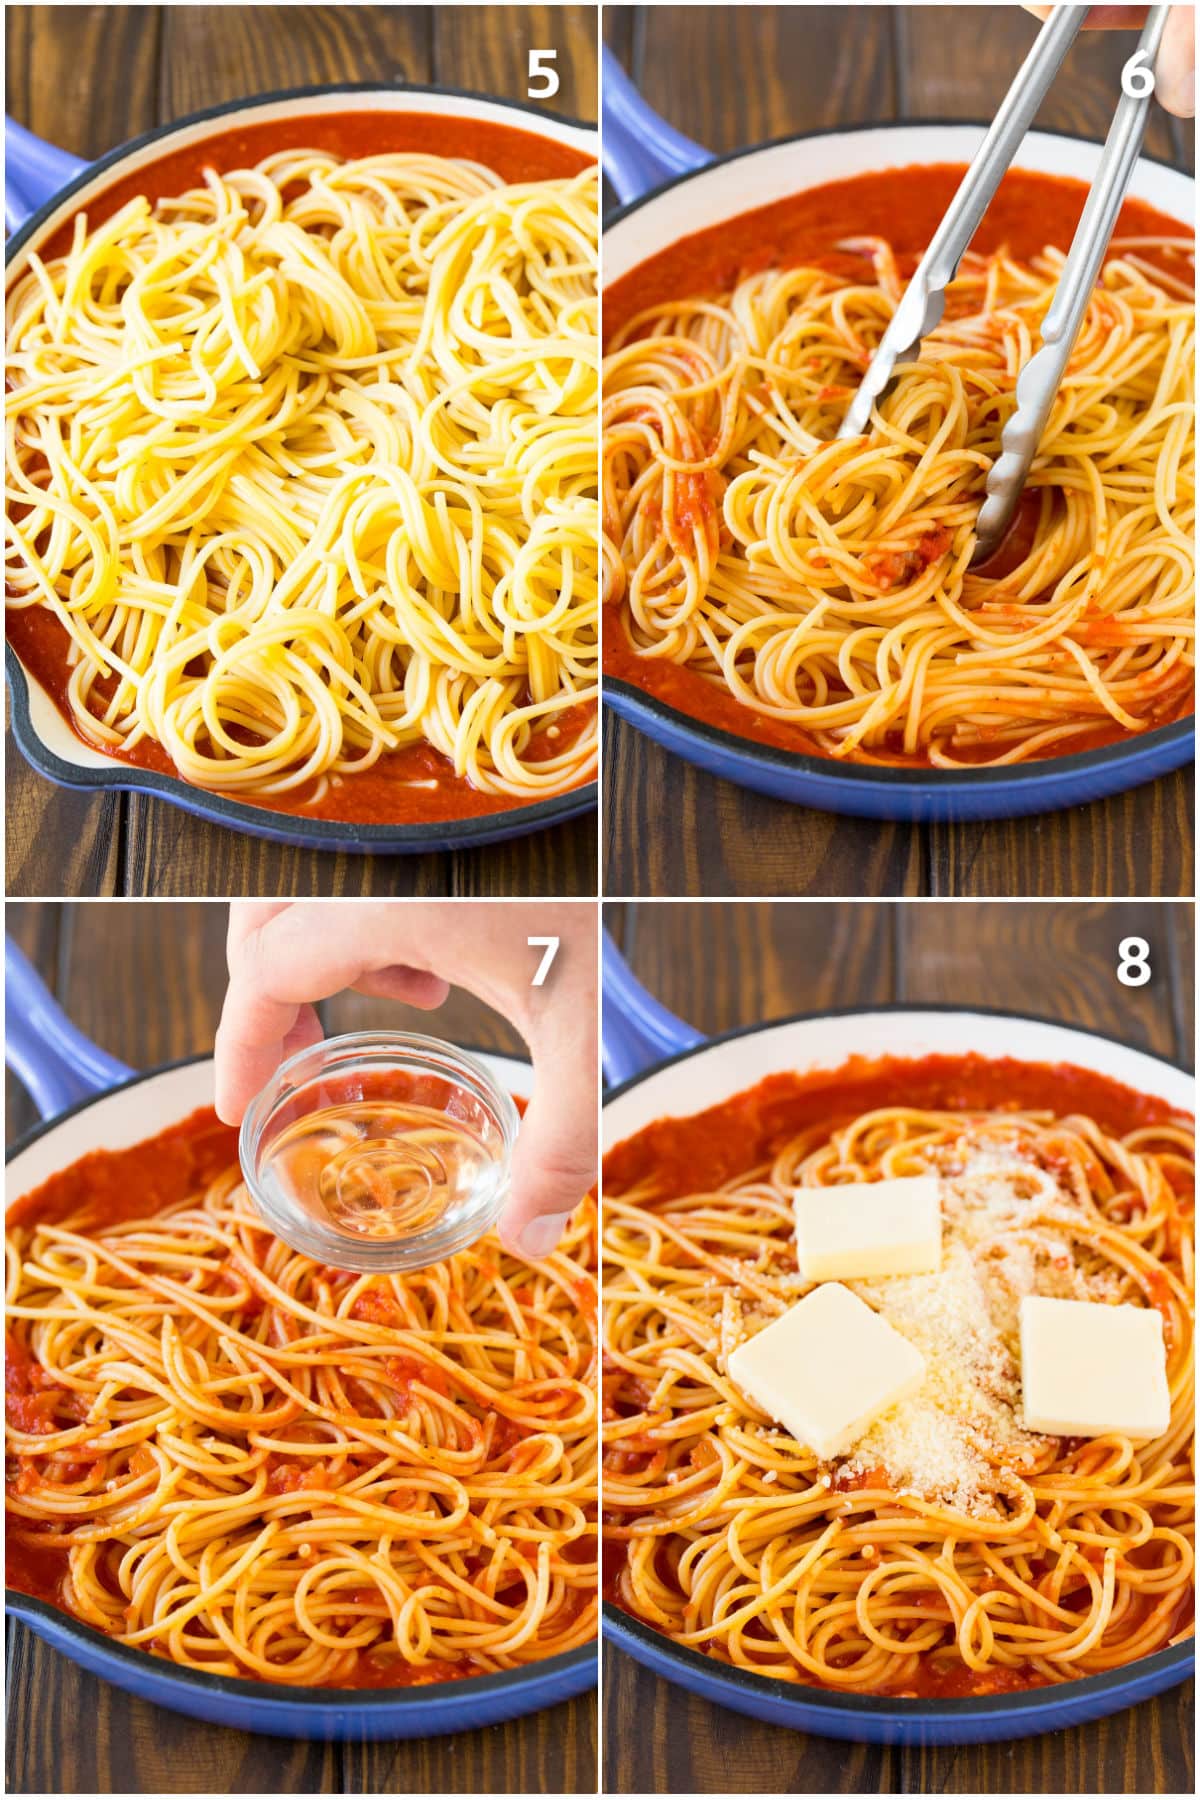 Process shots showing pasta being tossed in sauce and seasoned with butter and parmesan.